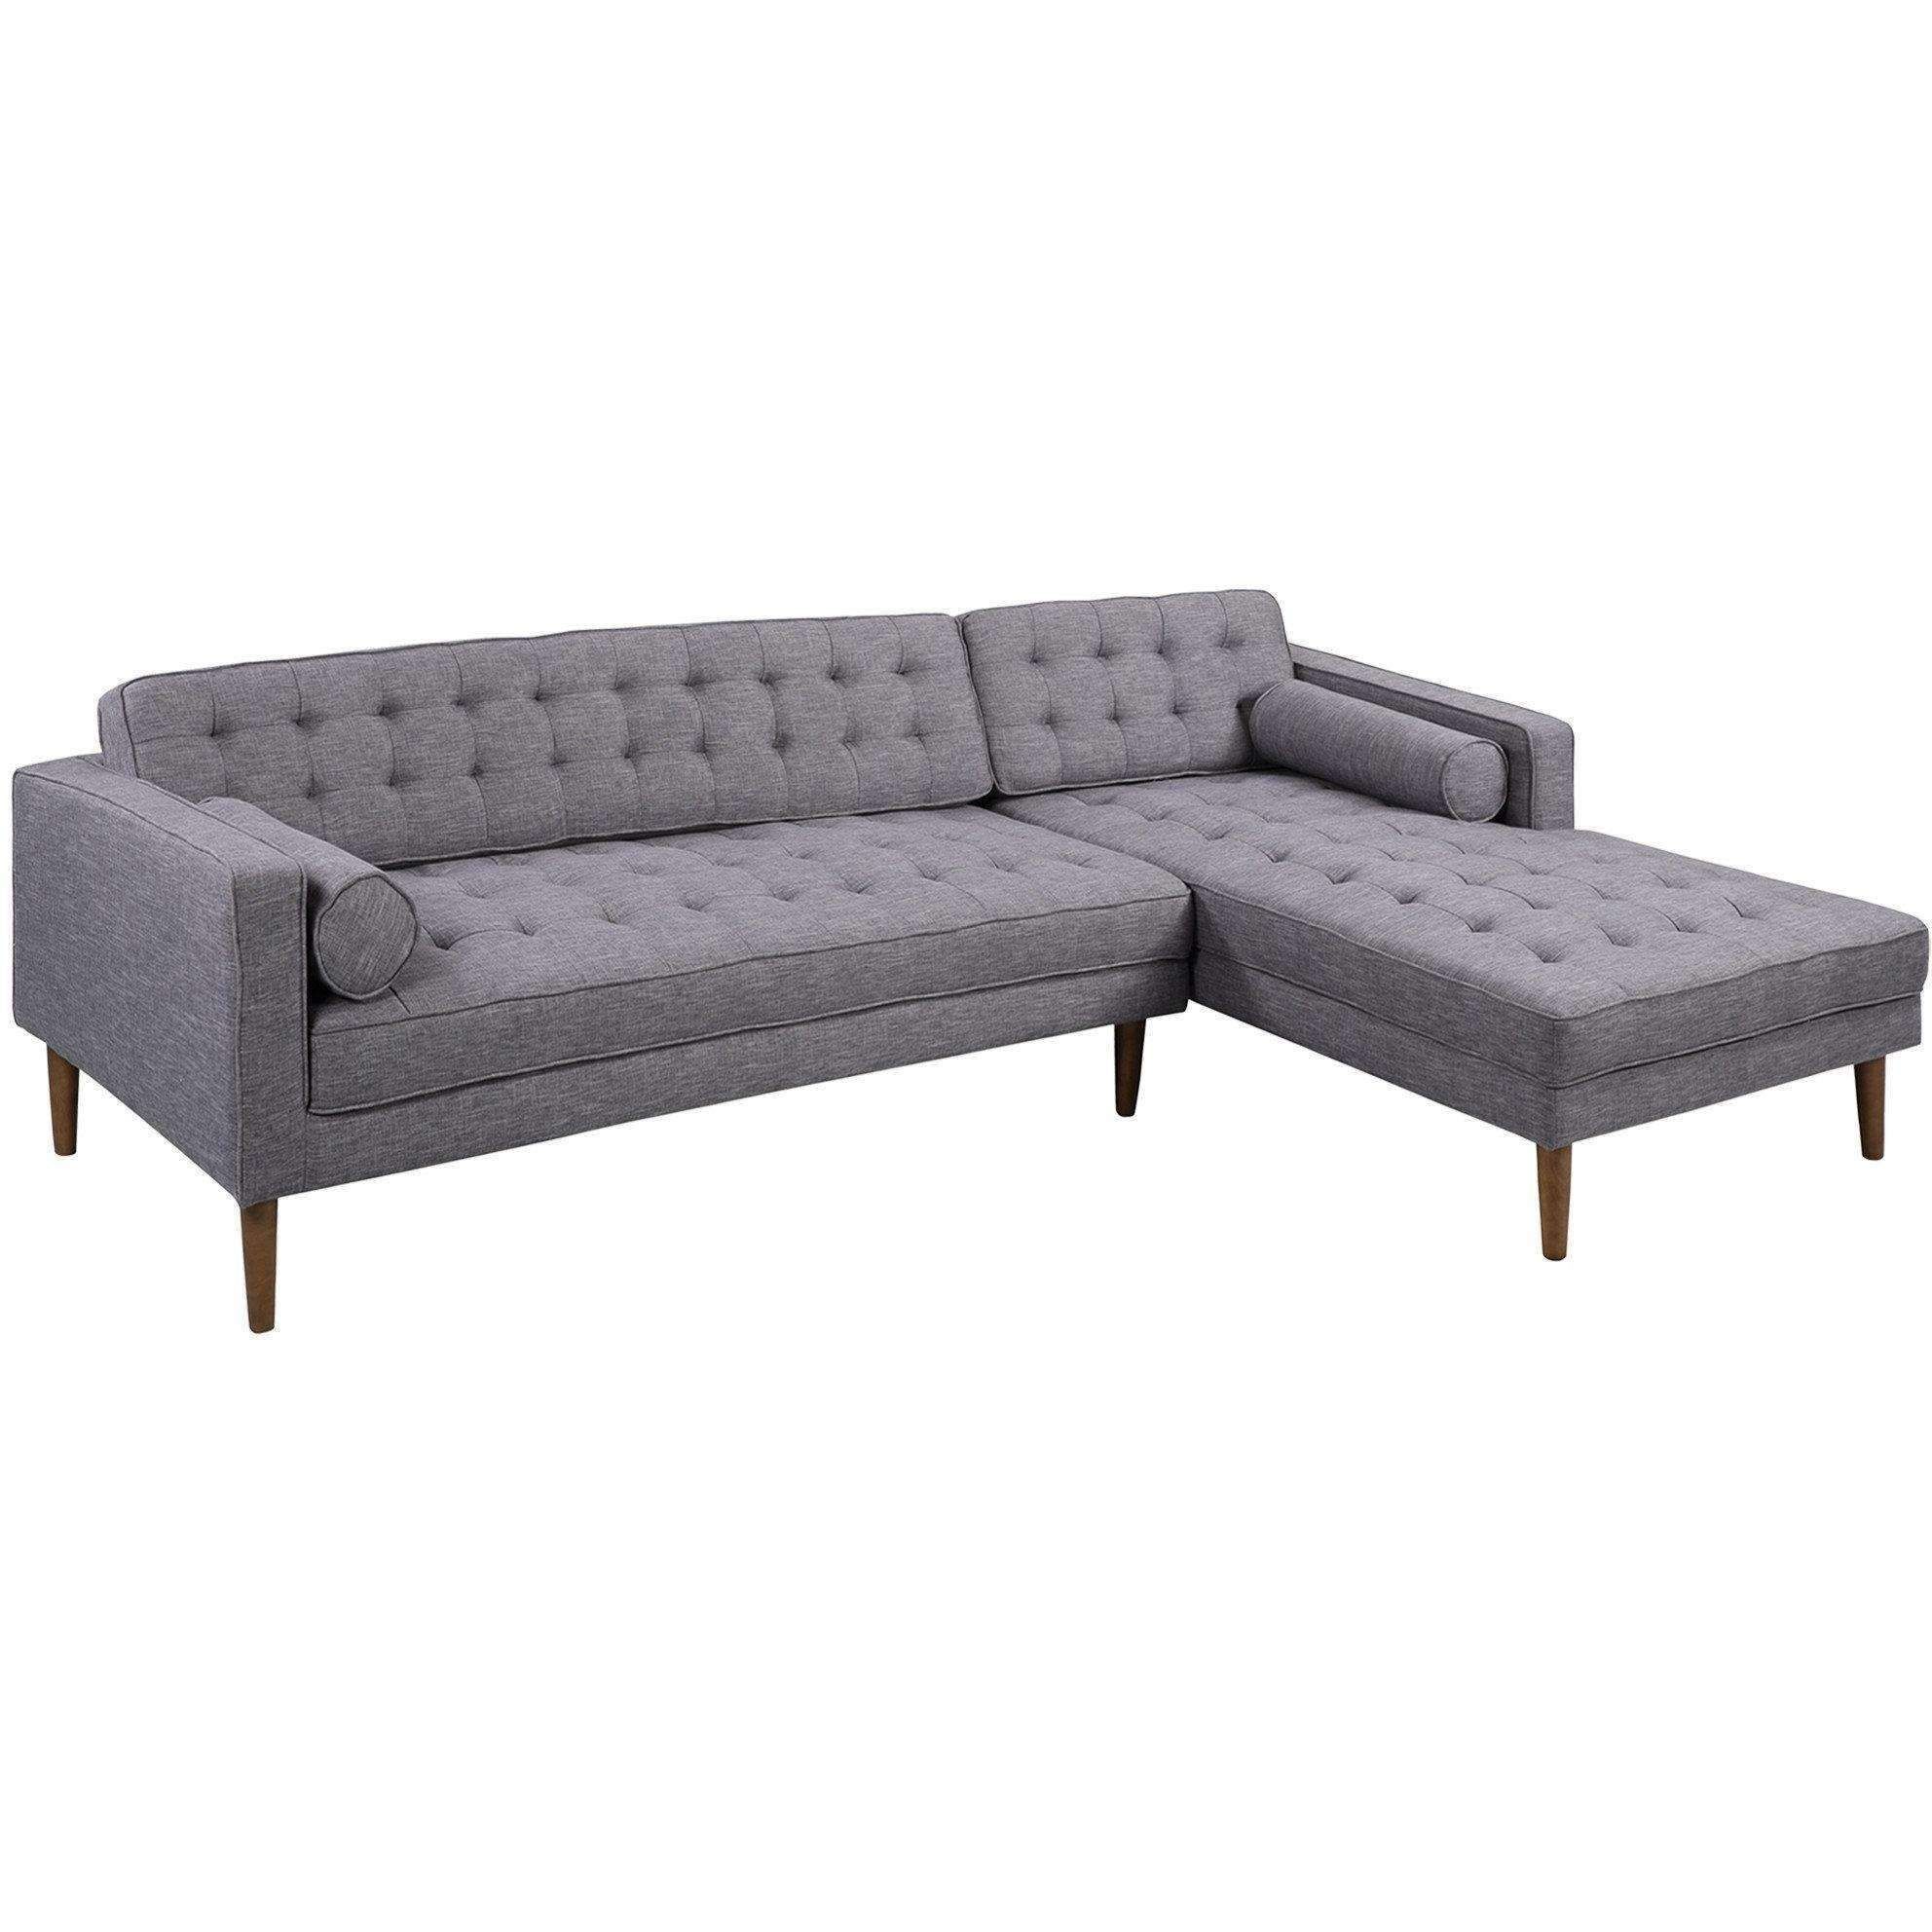 Armen Living Element Right Side Chaise Sectional In Dark With Element Right Side Chaise Sectional Sofas In Dark Gray Linen And Walnut Legs (View 1 of 15)